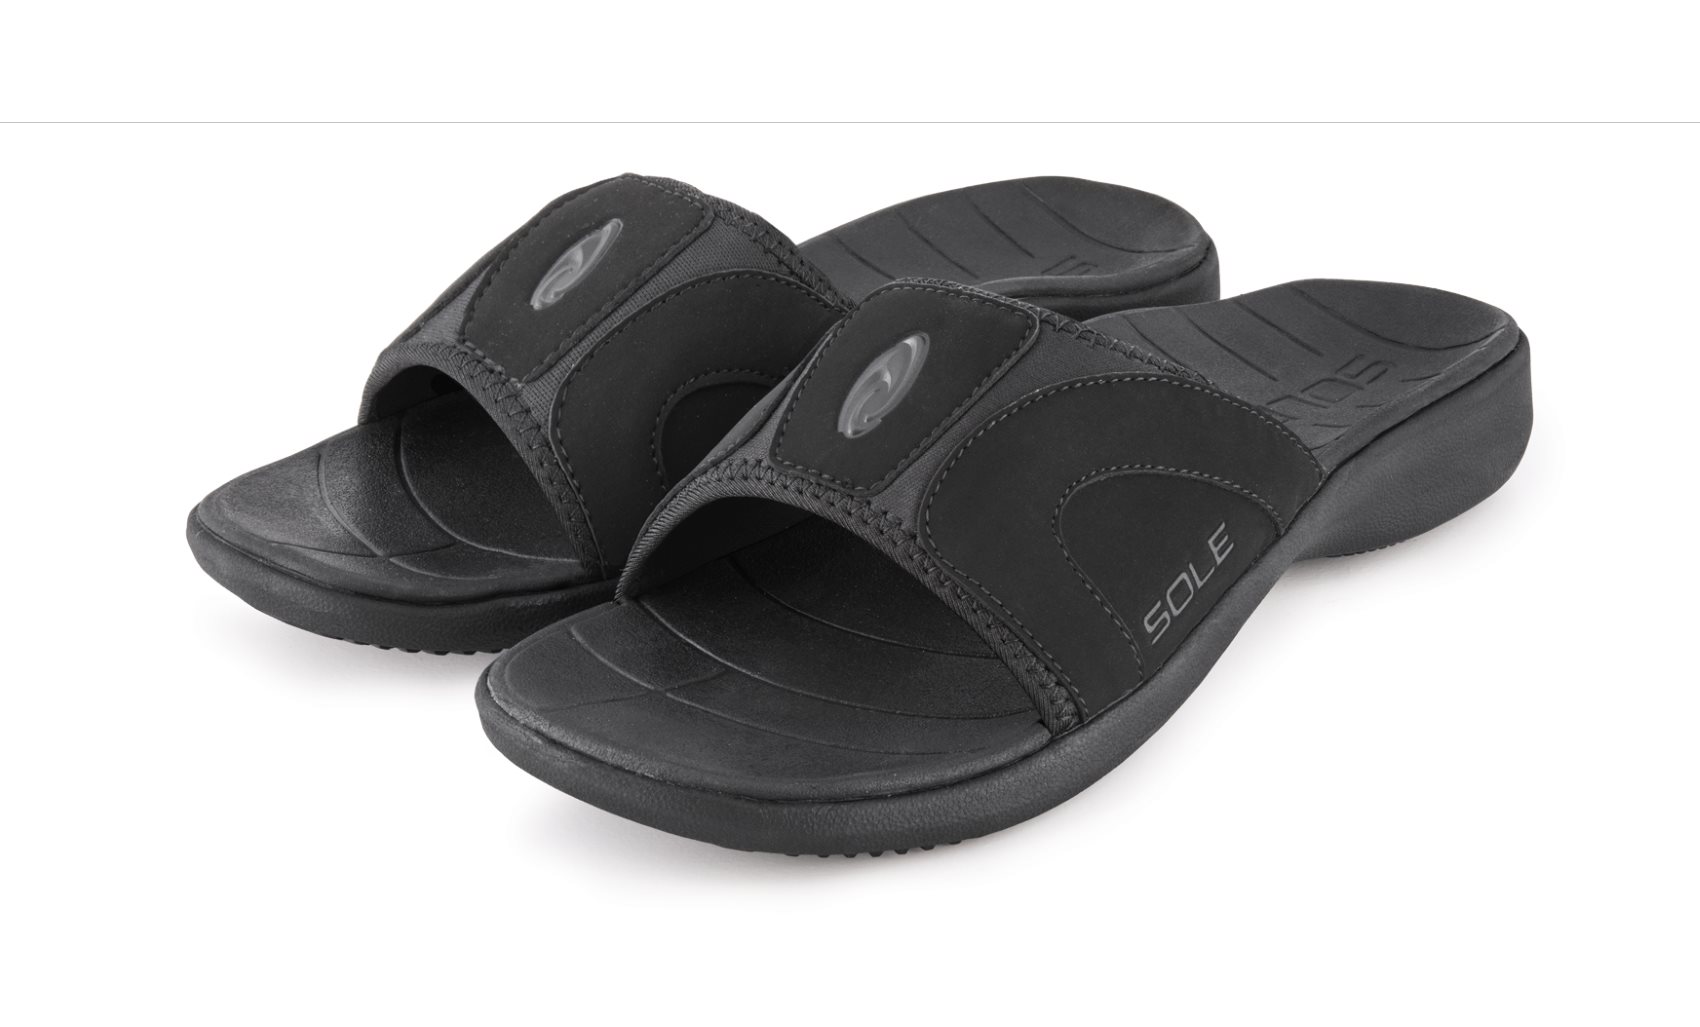 mens sandals with good arch support